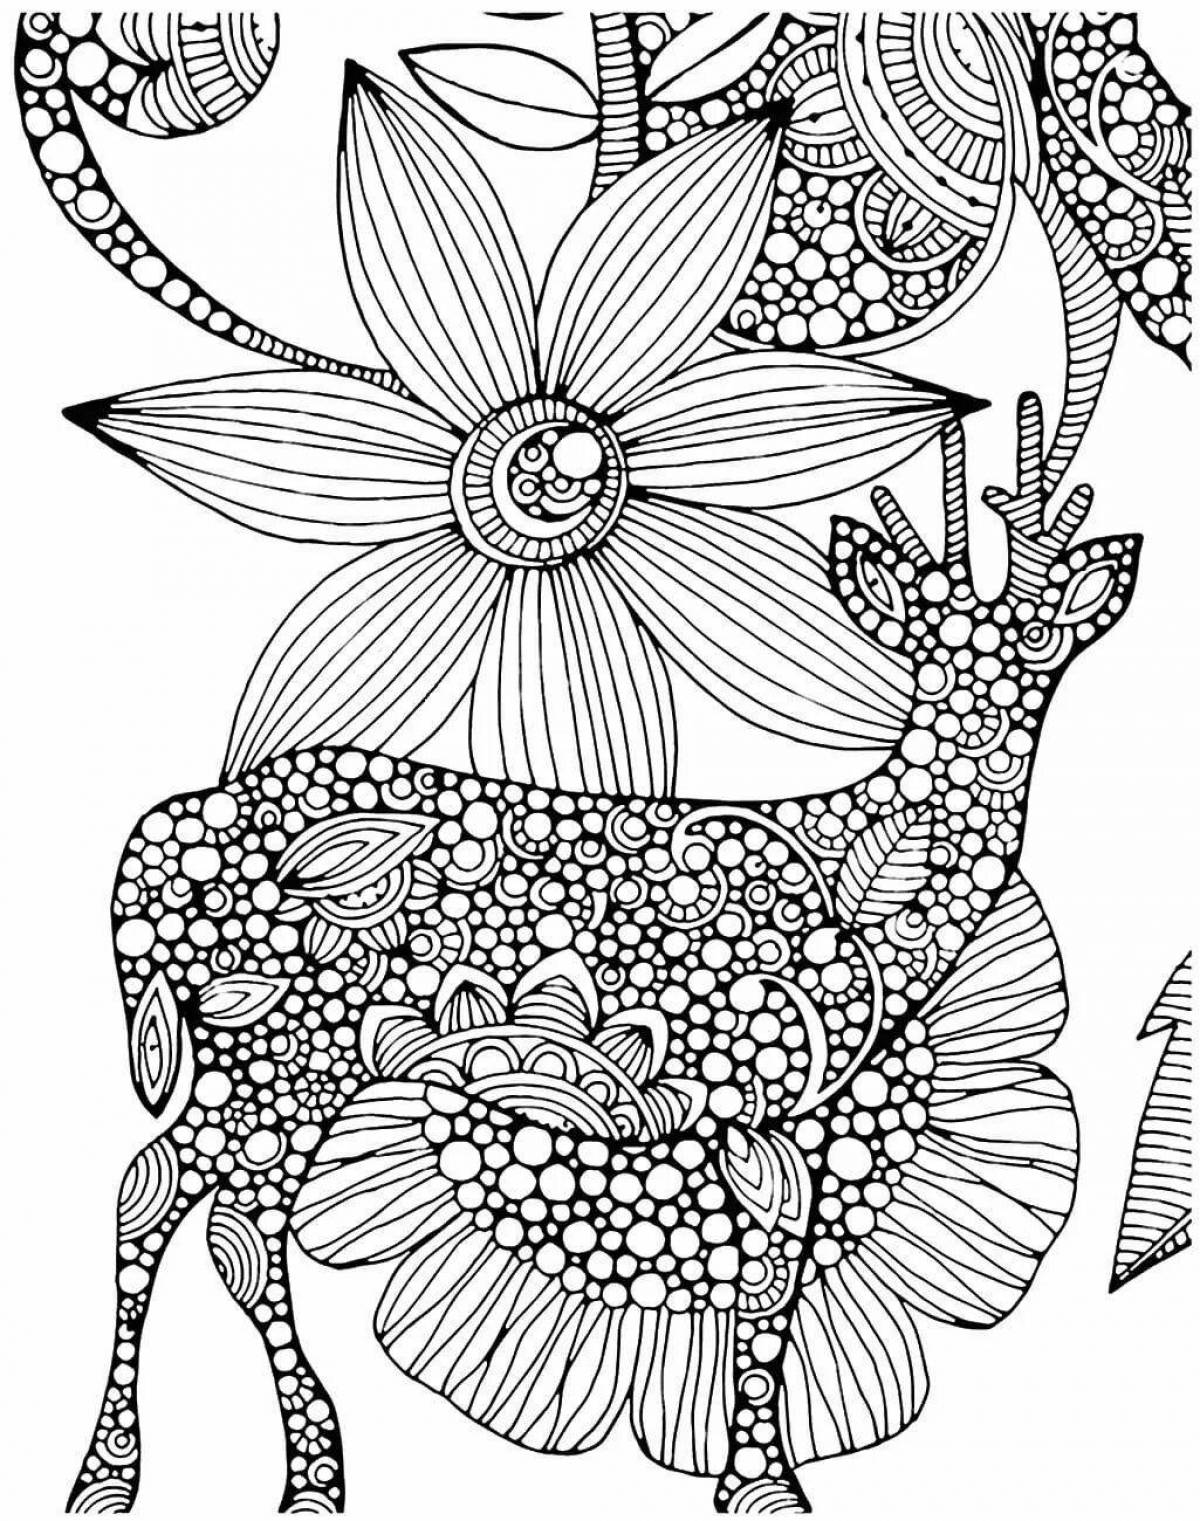 Luminous coloring book relaxation antistress for adults